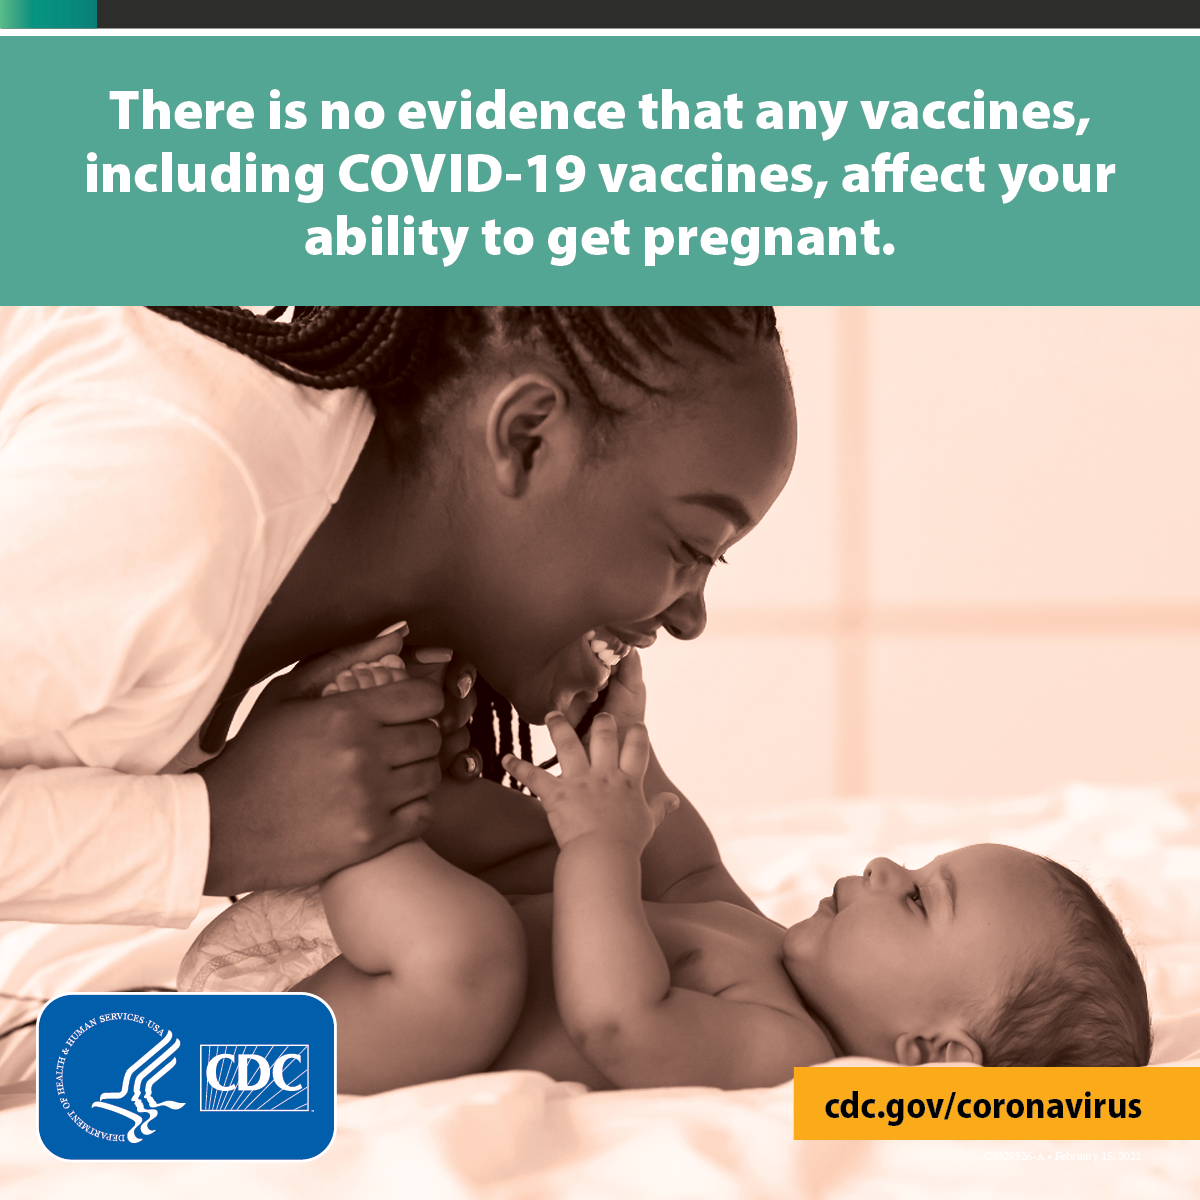 There is no evidence that any vaccines, including the COVID-19 vaccines, affect your ability to get pregnant